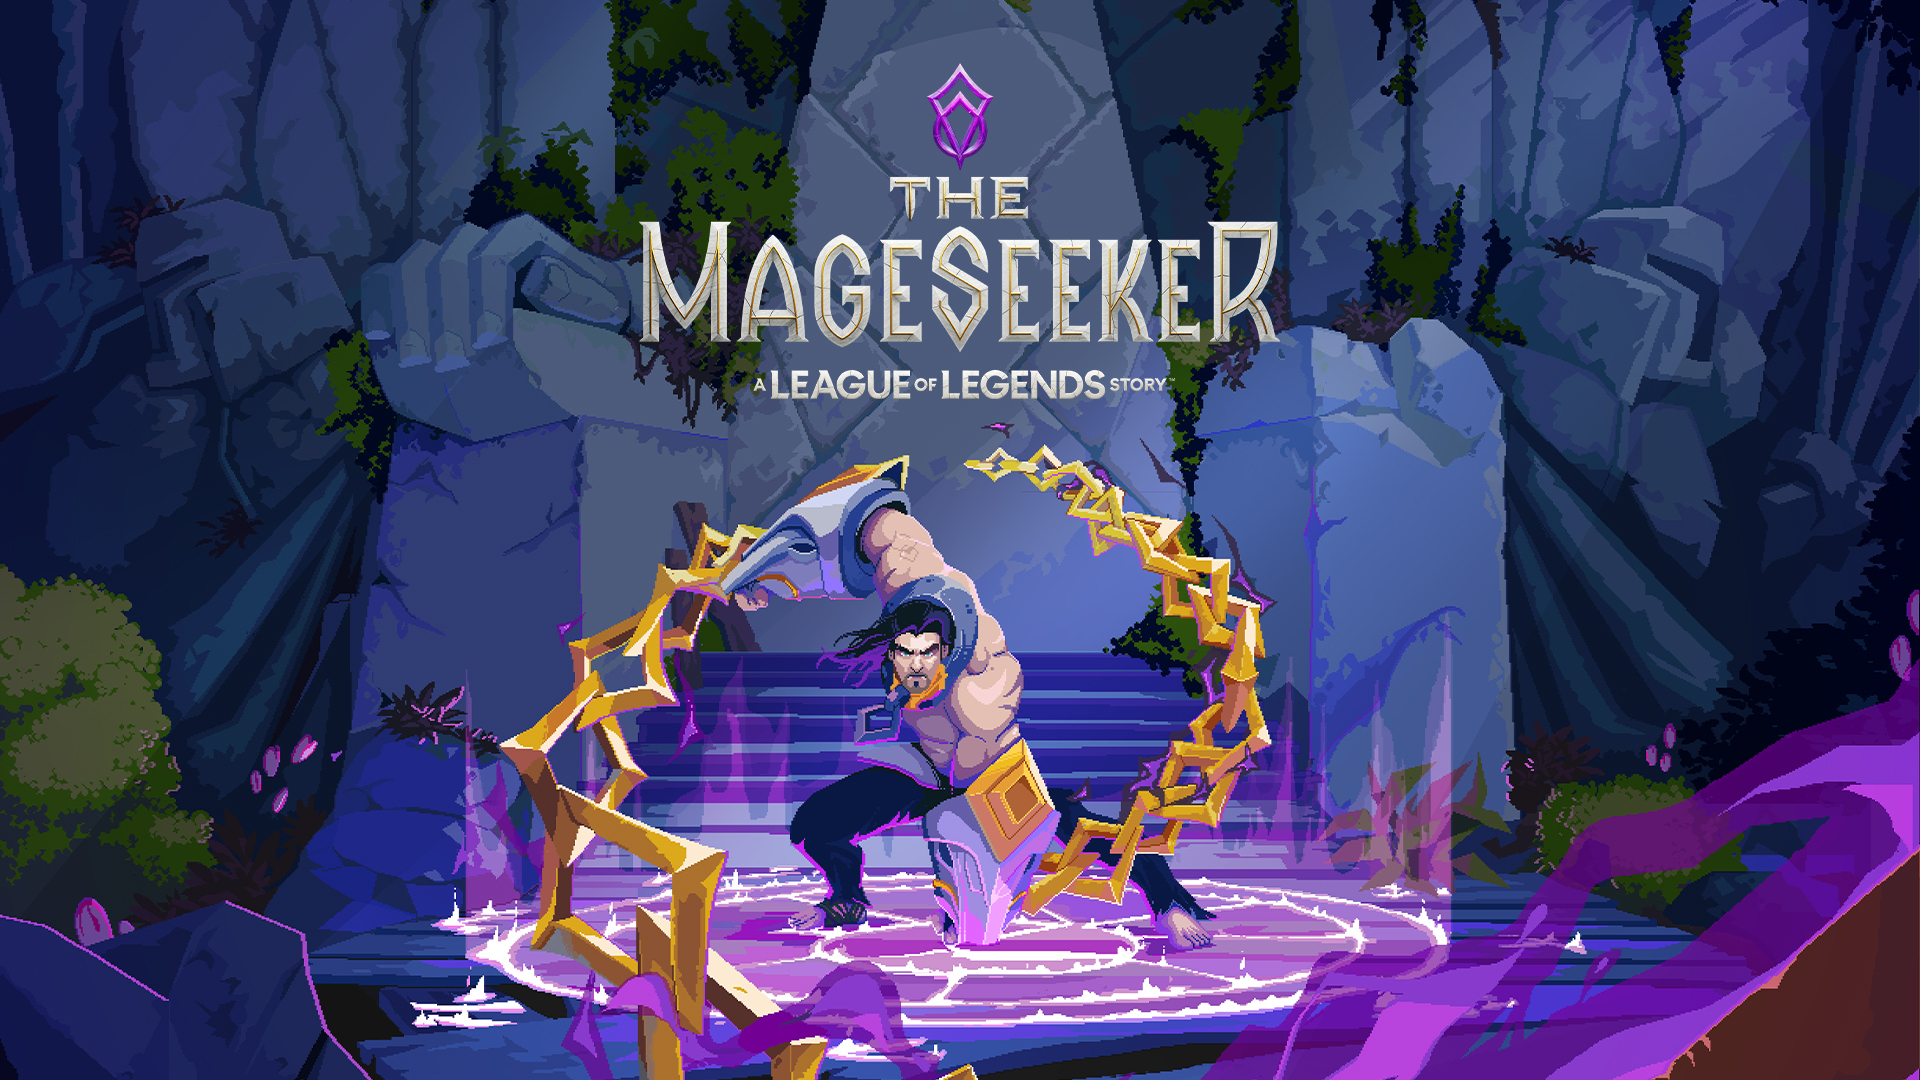 ‘The Mageseeker’ is a League of Legends RPG from the studio behind ‘Moonlighter’